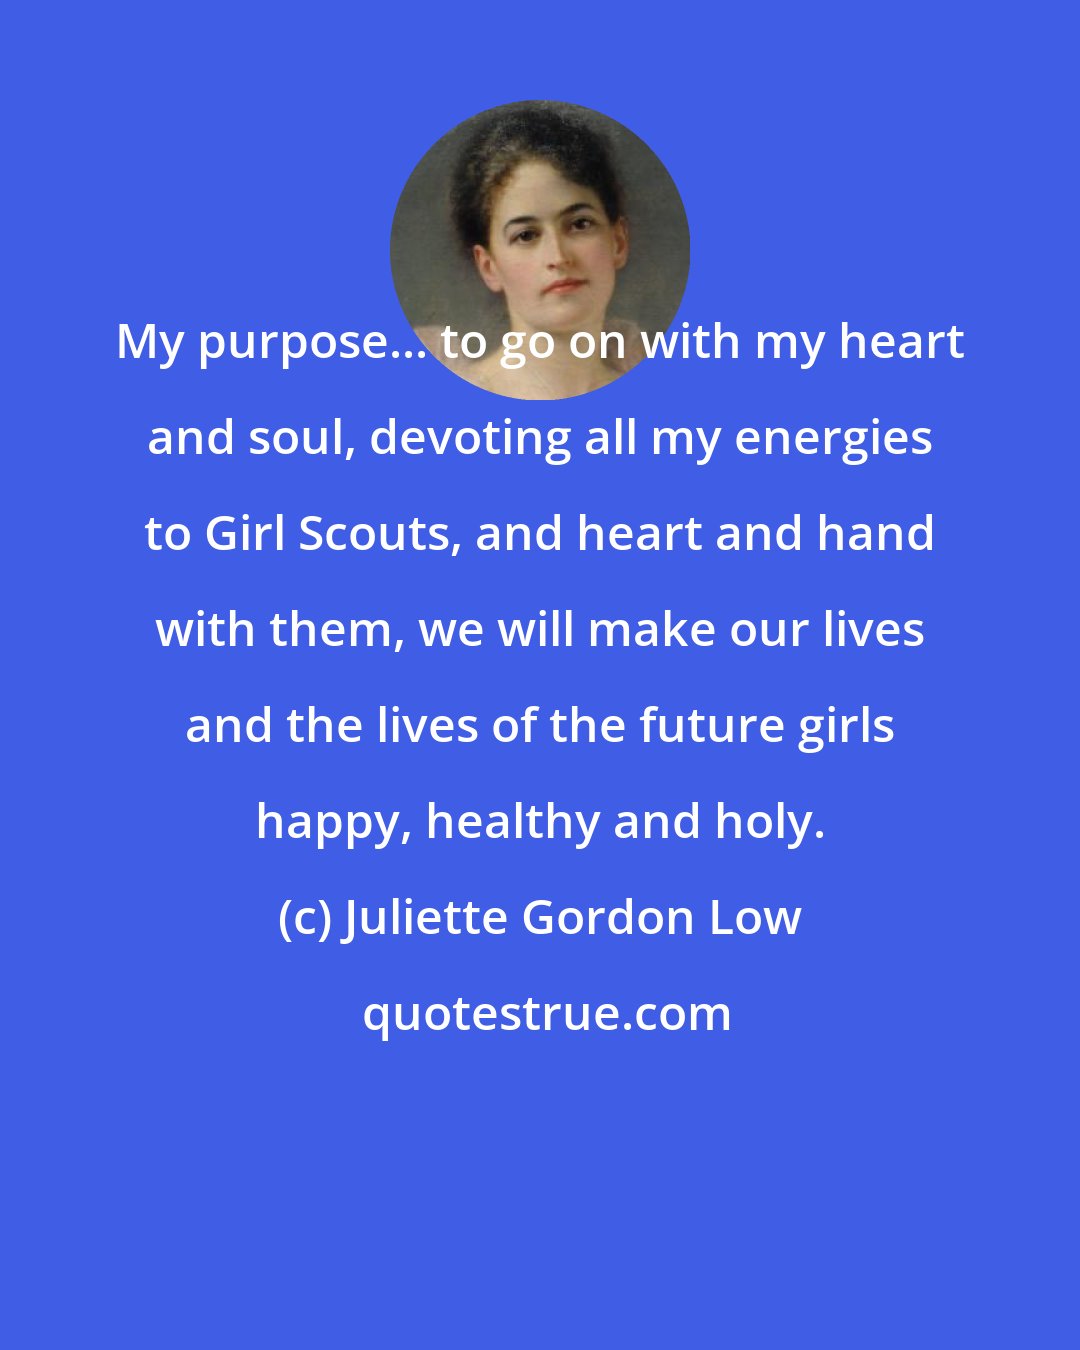 Juliette Gordon Low: My purpose... to go on with my heart and soul, devoting all my energies to Girl Scouts, and heart and hand with them, we will make our lives and the lives of the future girls happy, healthy and holy.